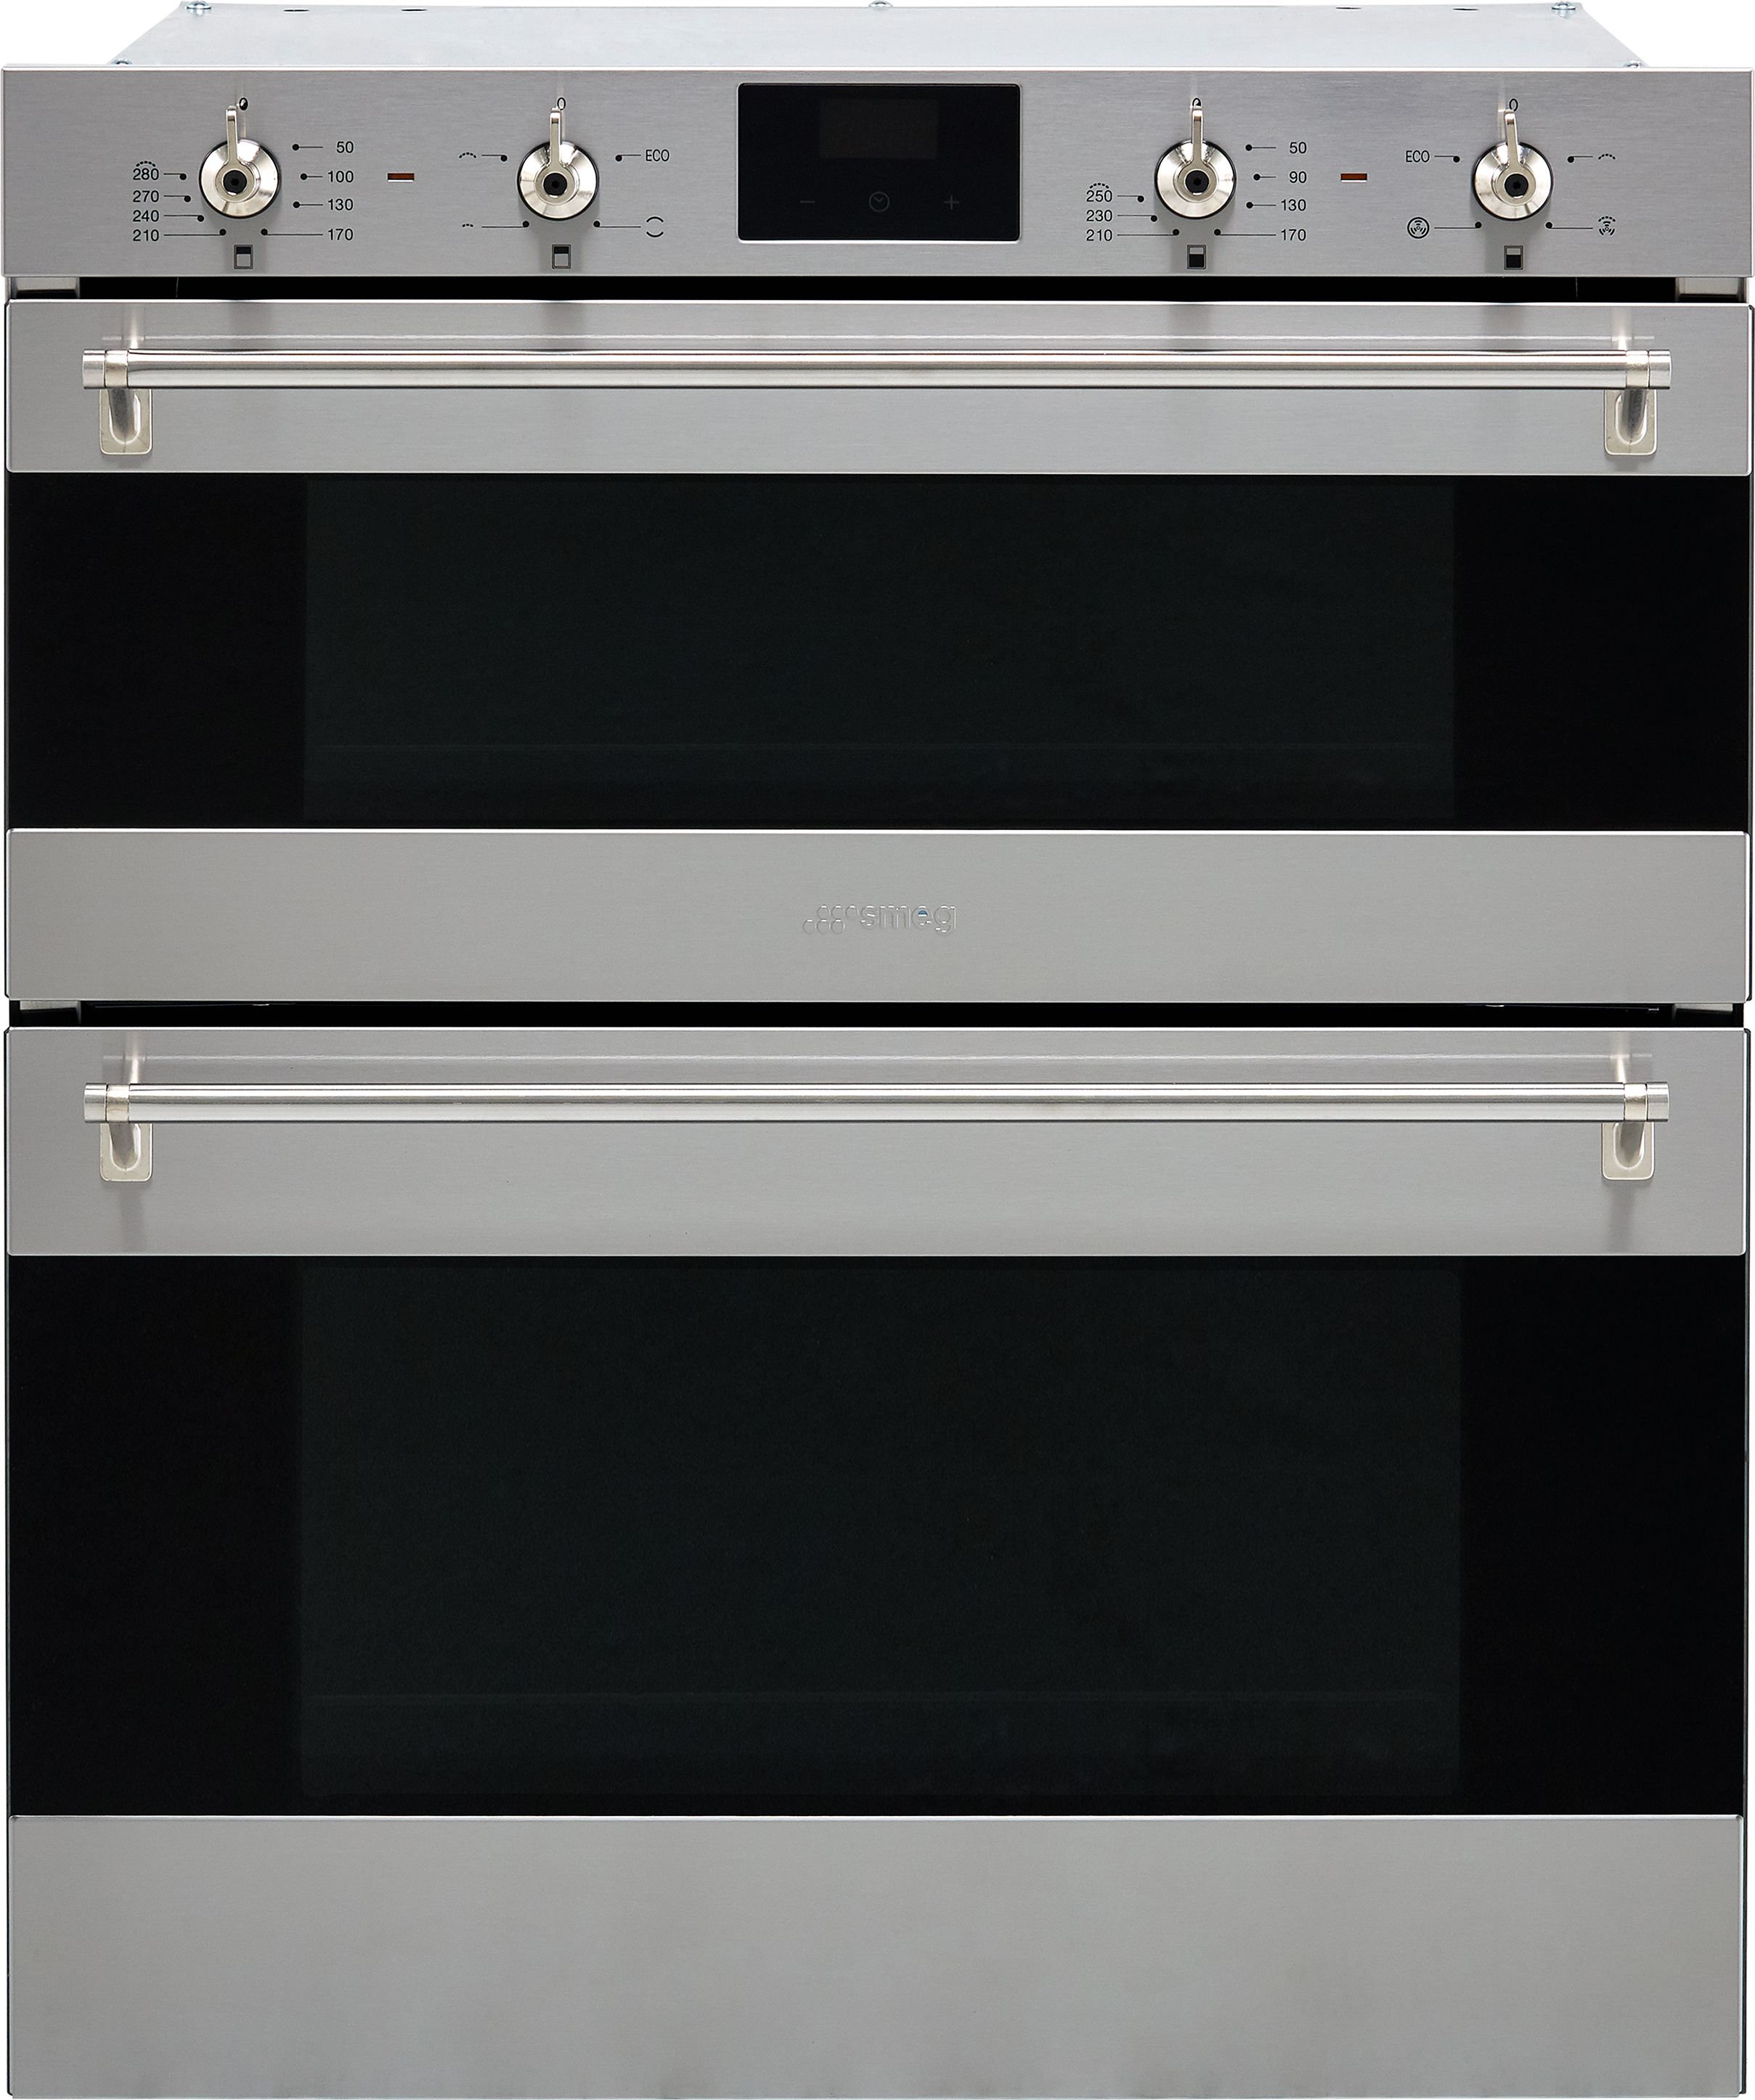 Smeg Classic DUSF6300X Built Under Electric Double Oven - Stainless Steel - A/B Rated, Stainless Steel